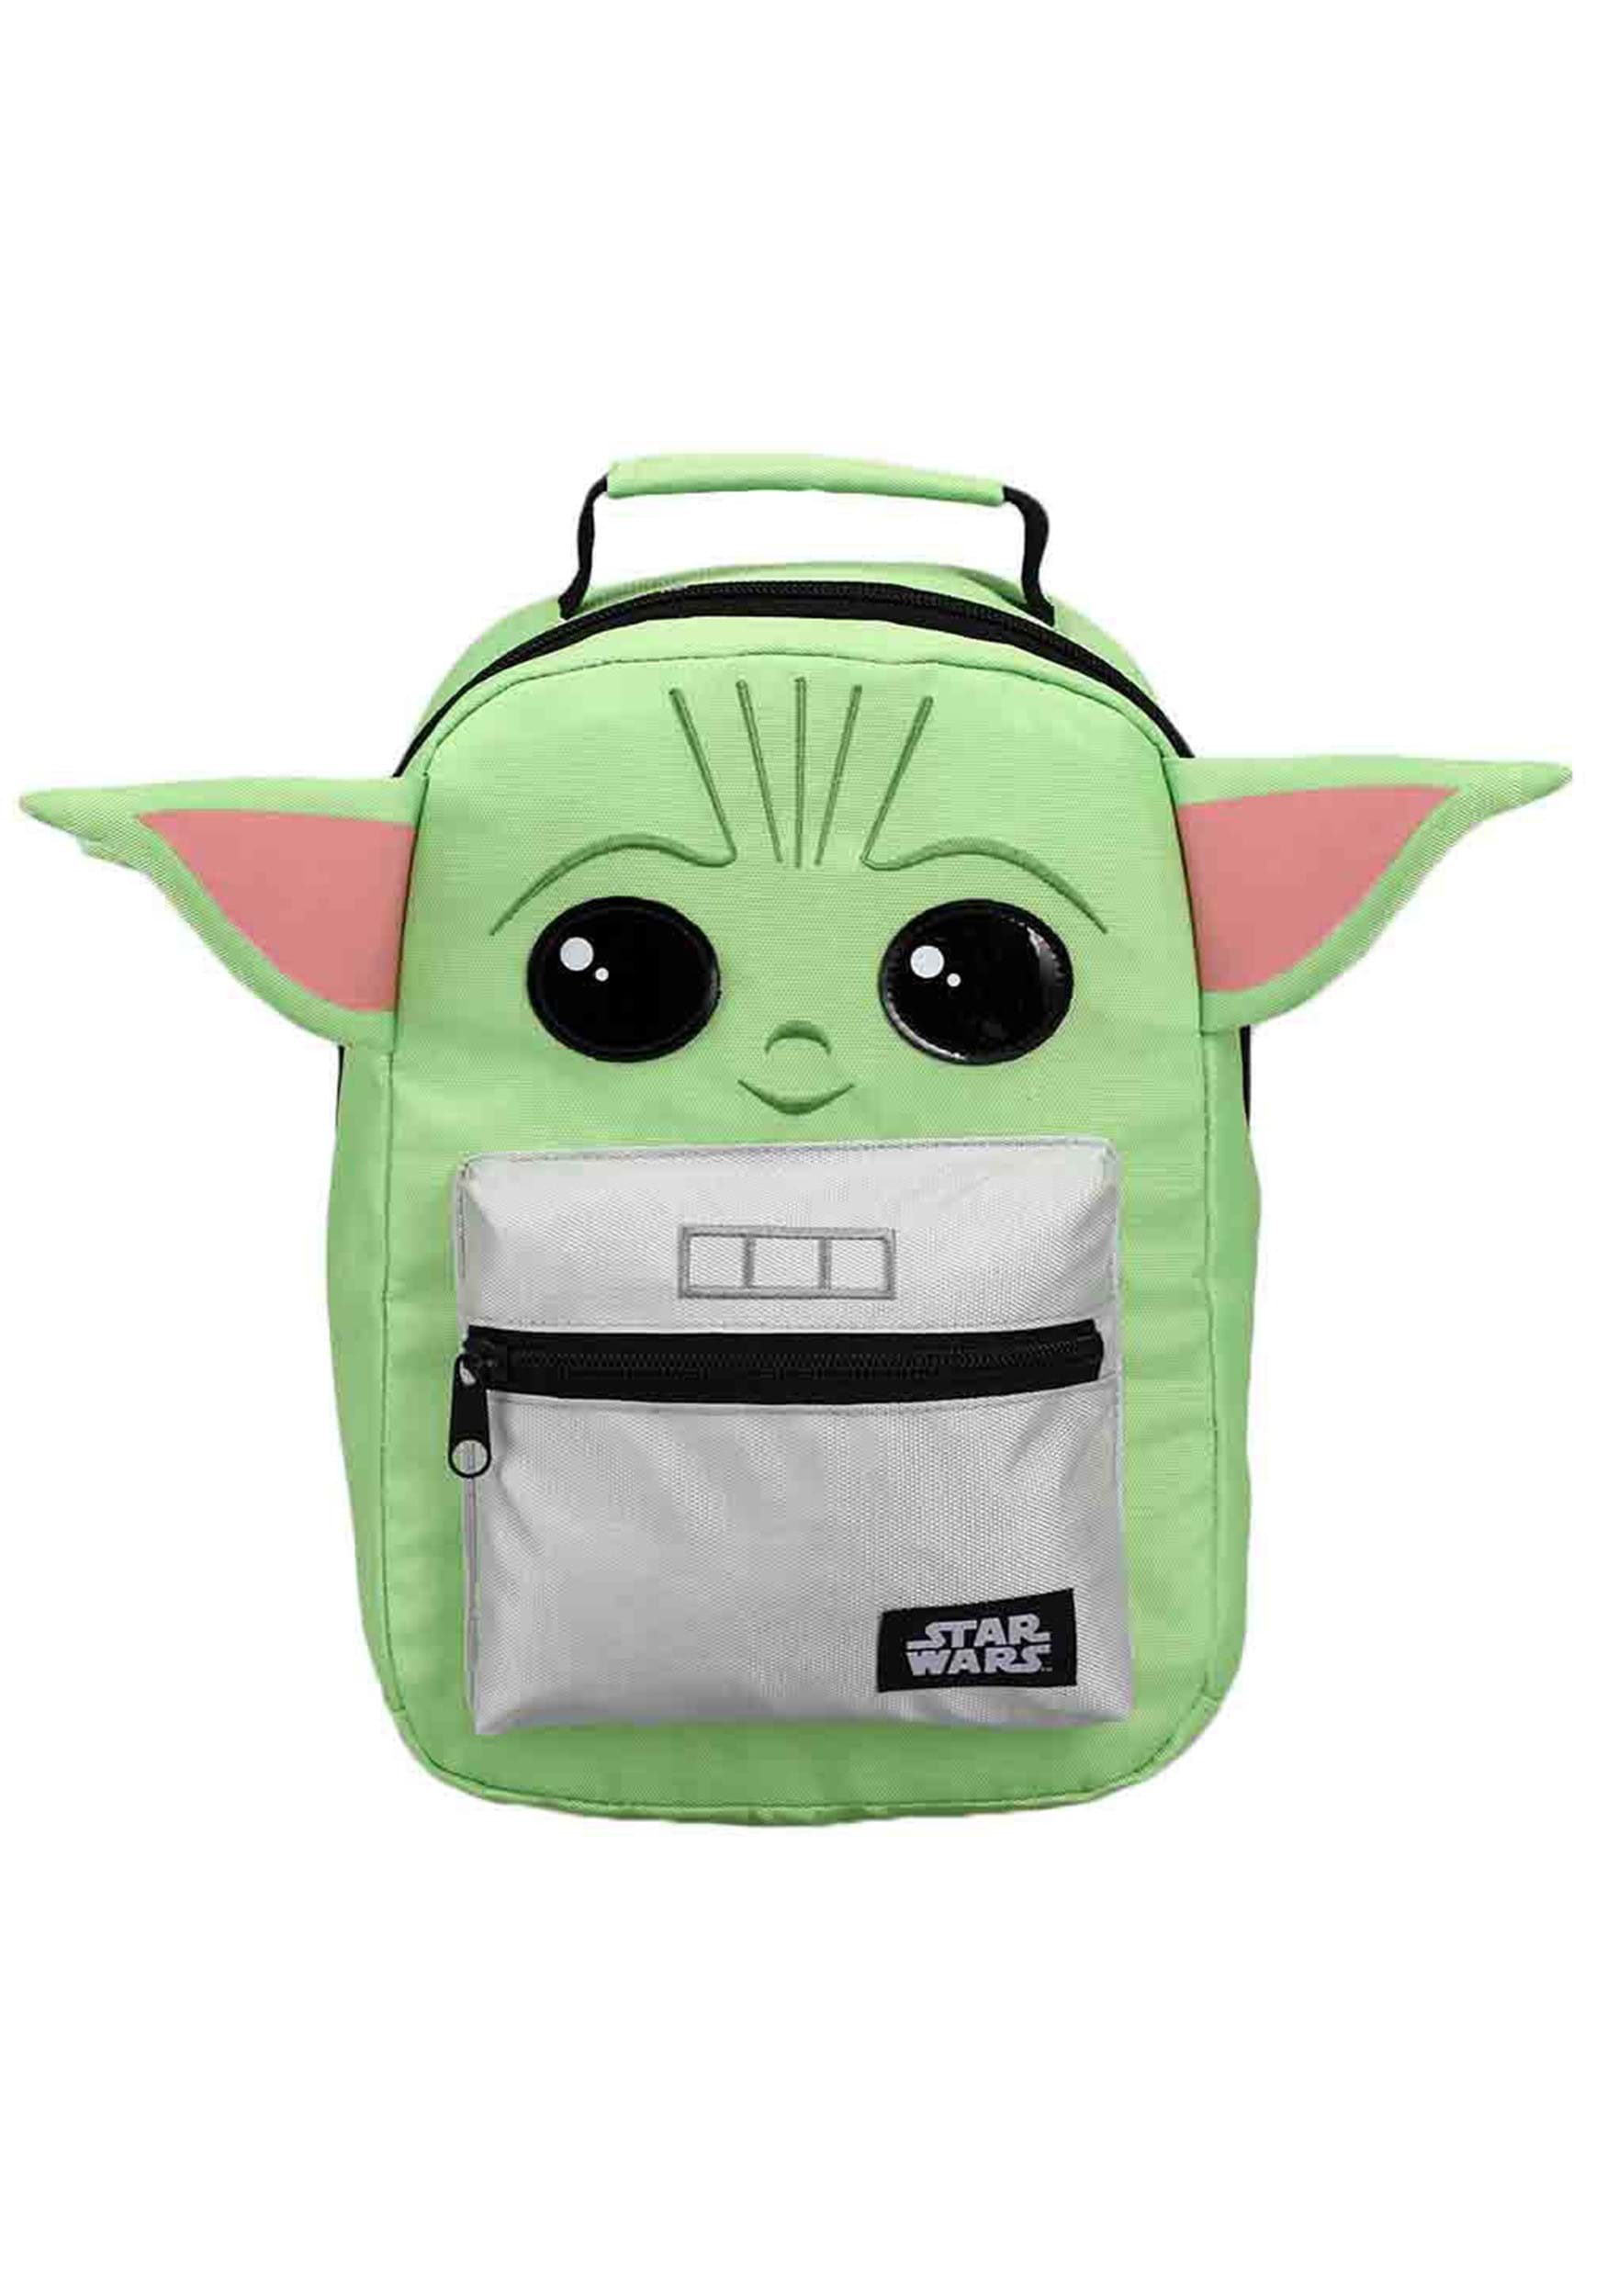 https://images.fun.com/products/78223/1-1/star-wars-the-mandalorian-grogu-insulated-lunch-tote.jpg